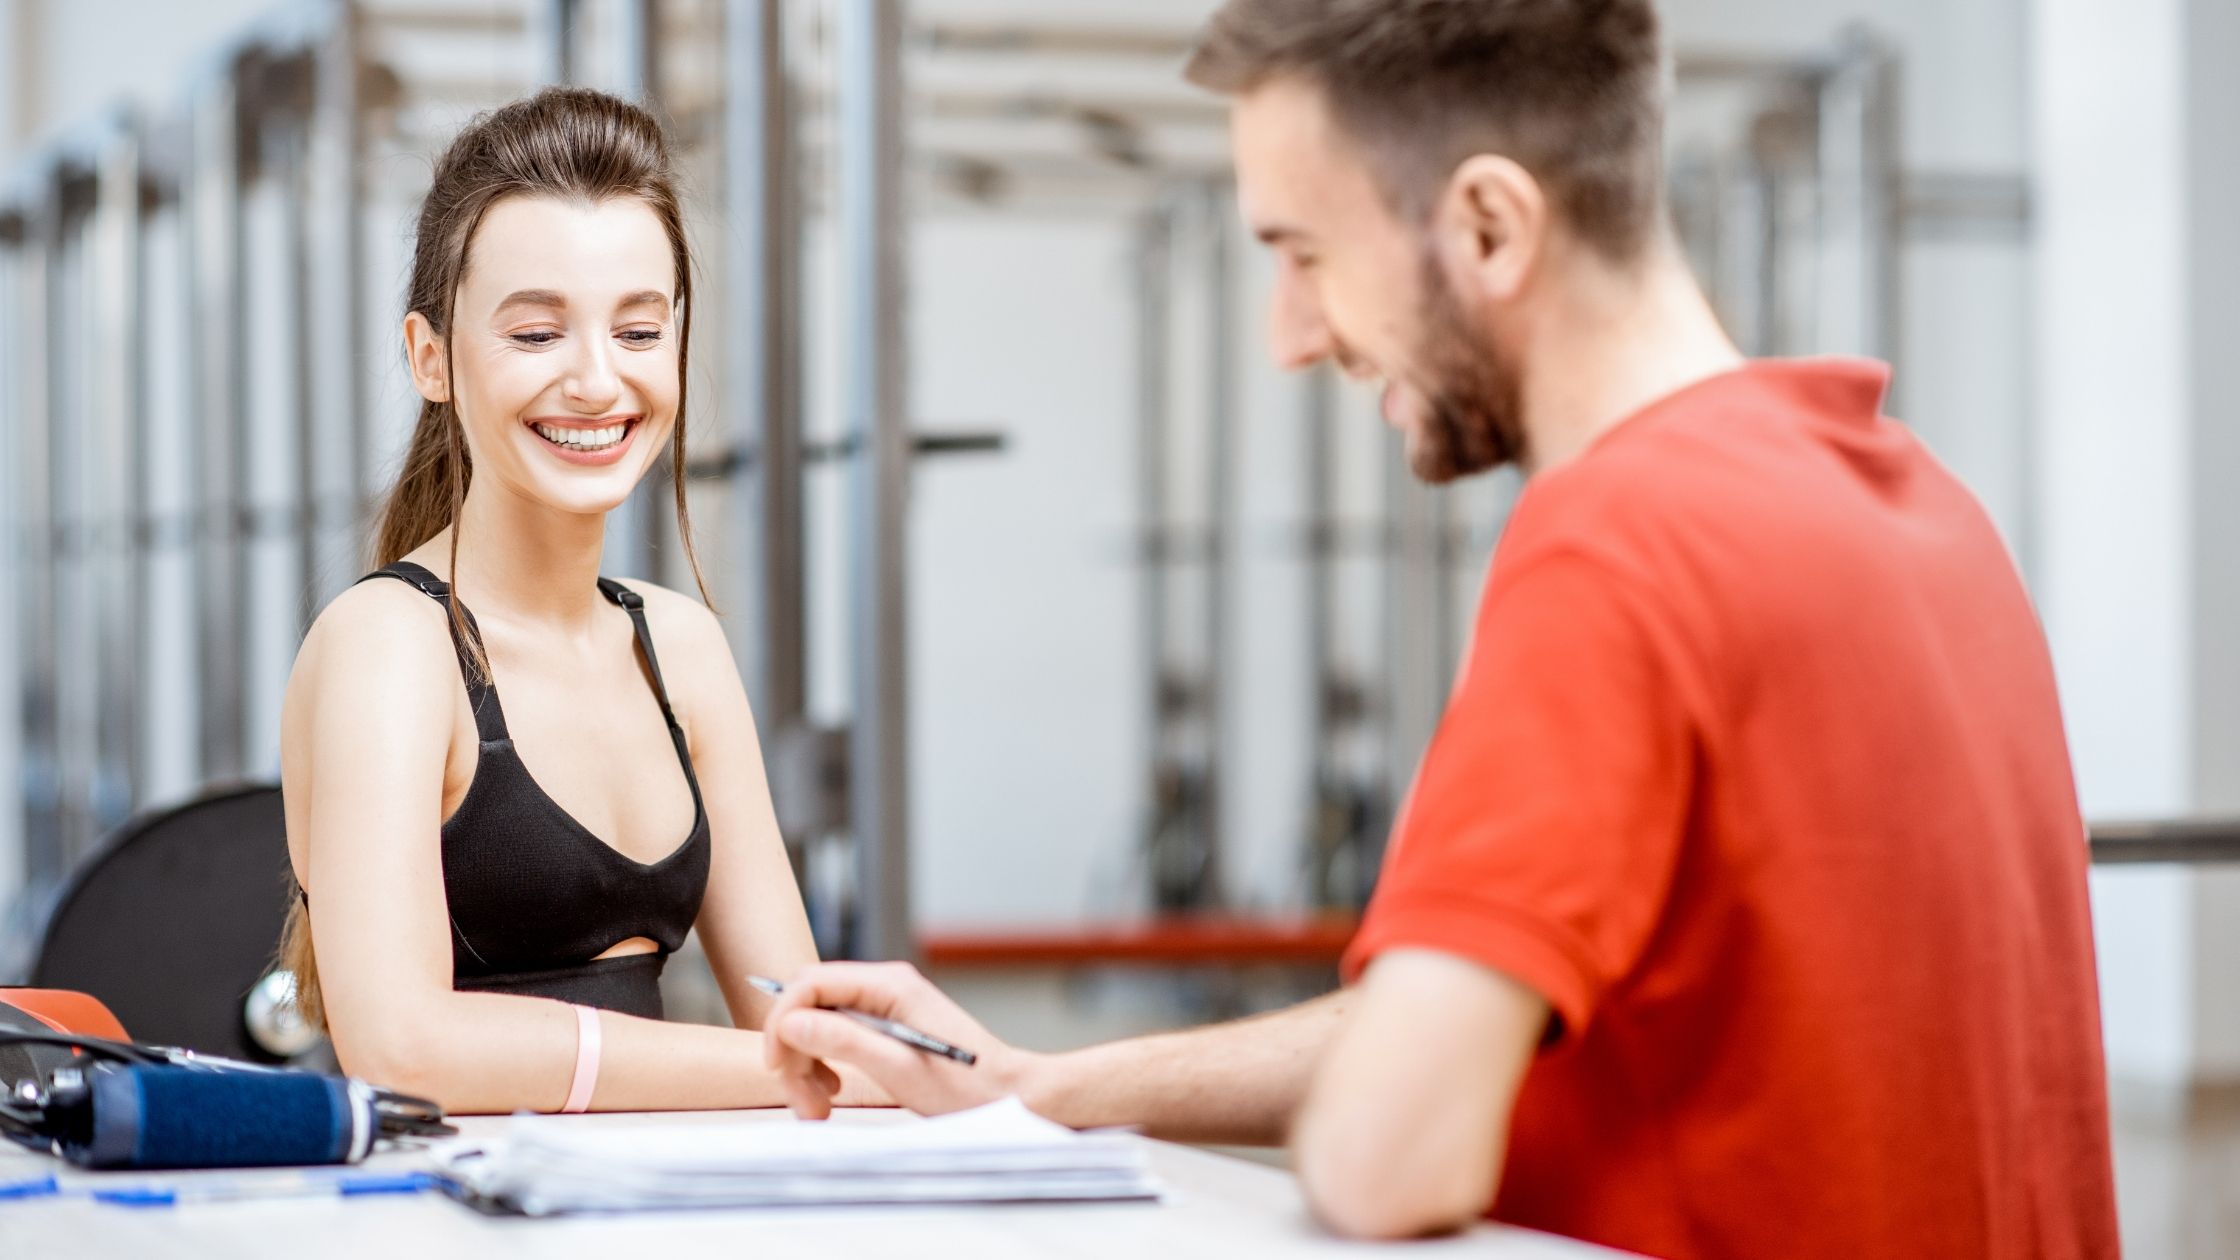 GUIDE How to conduct a Personal Training Consultation